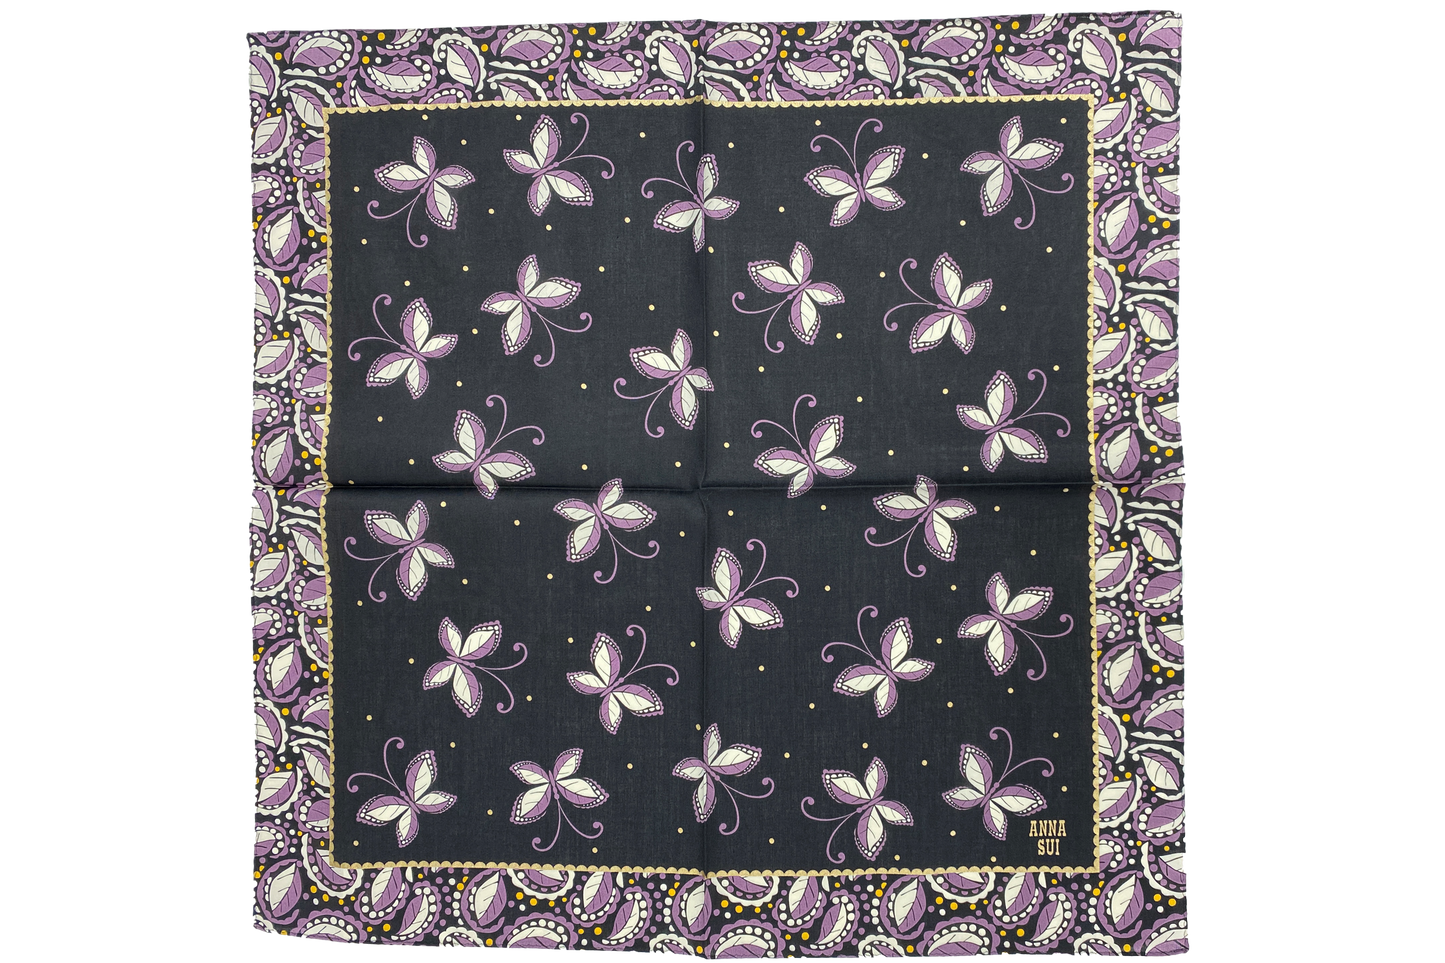 Handkerchief, squared black with pattern of purple/white butterfly, floral hue of purple border